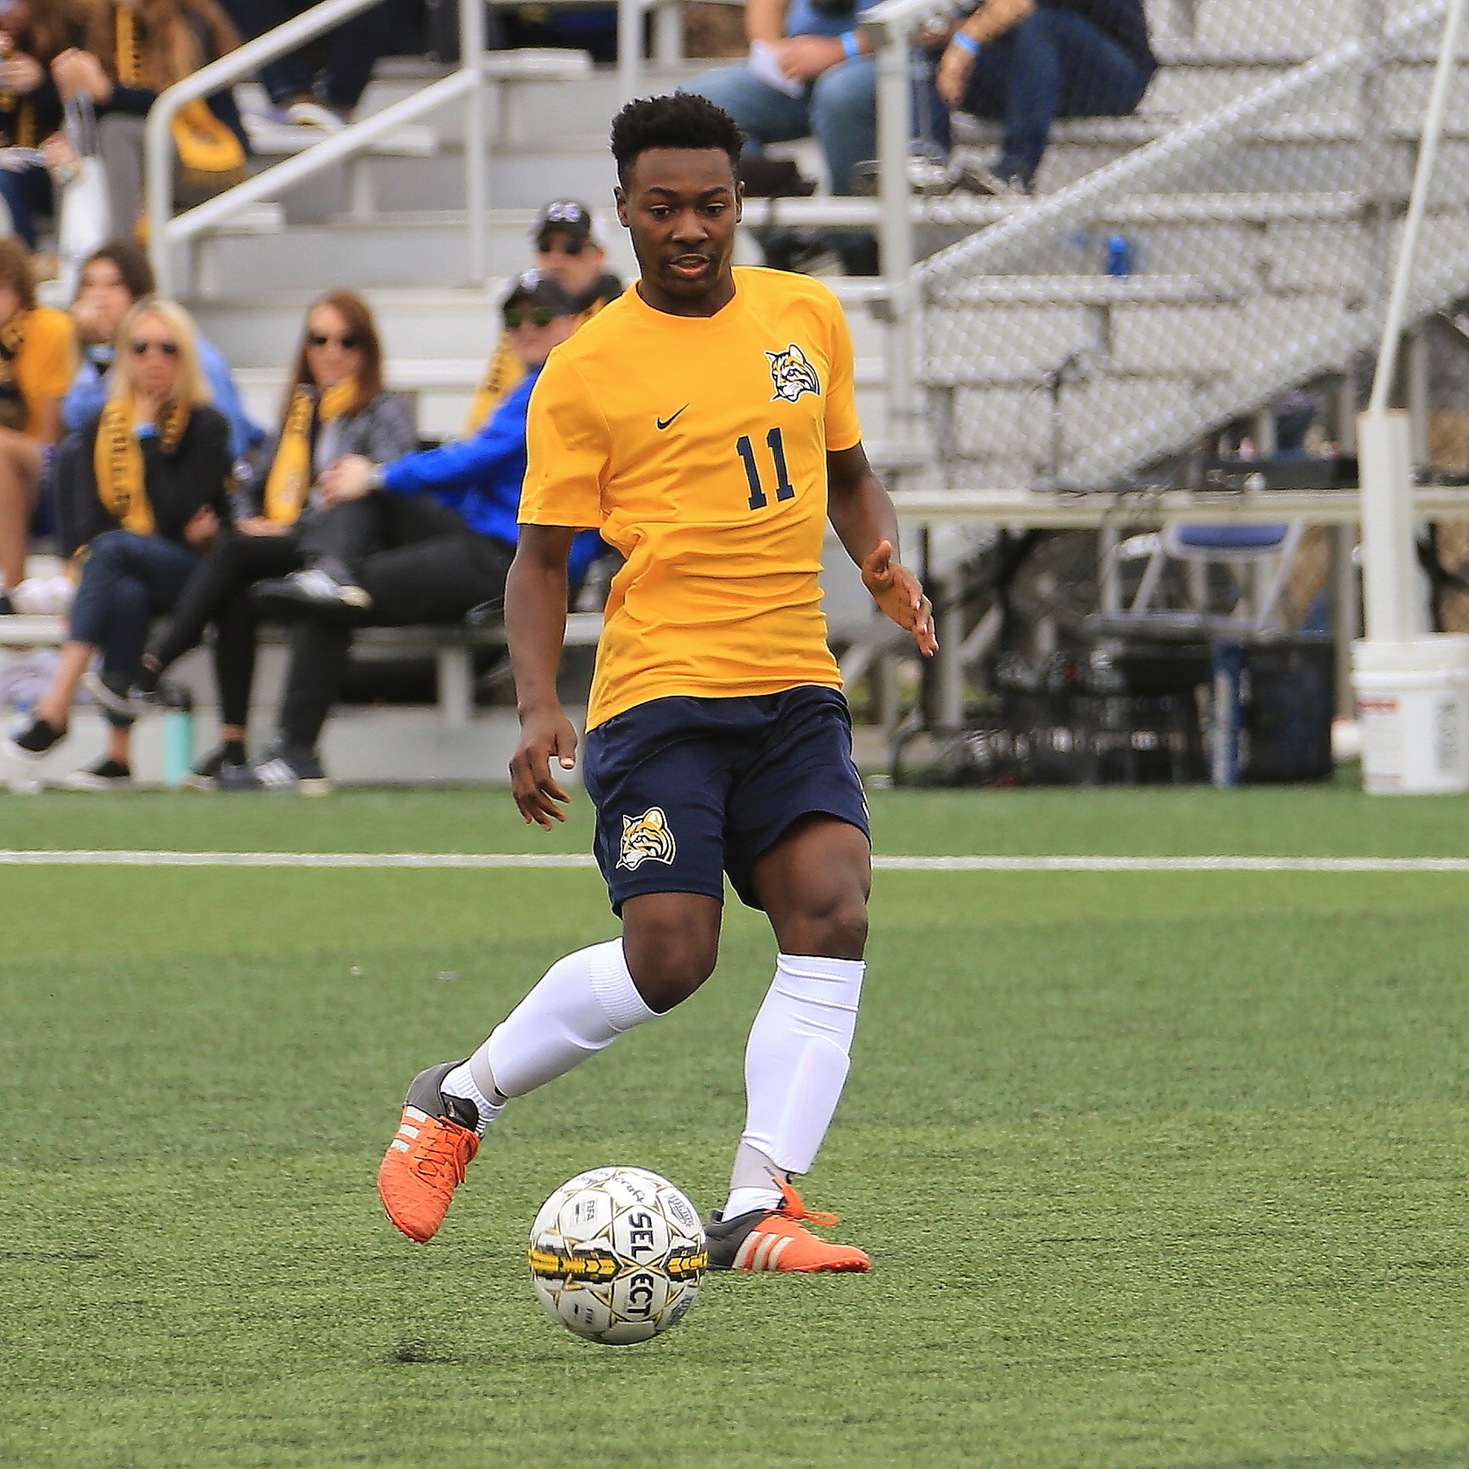 Schoolcraft College's Caleb Dupree dribbles the ball in a recent match. 
Photo: Schoolcraft College